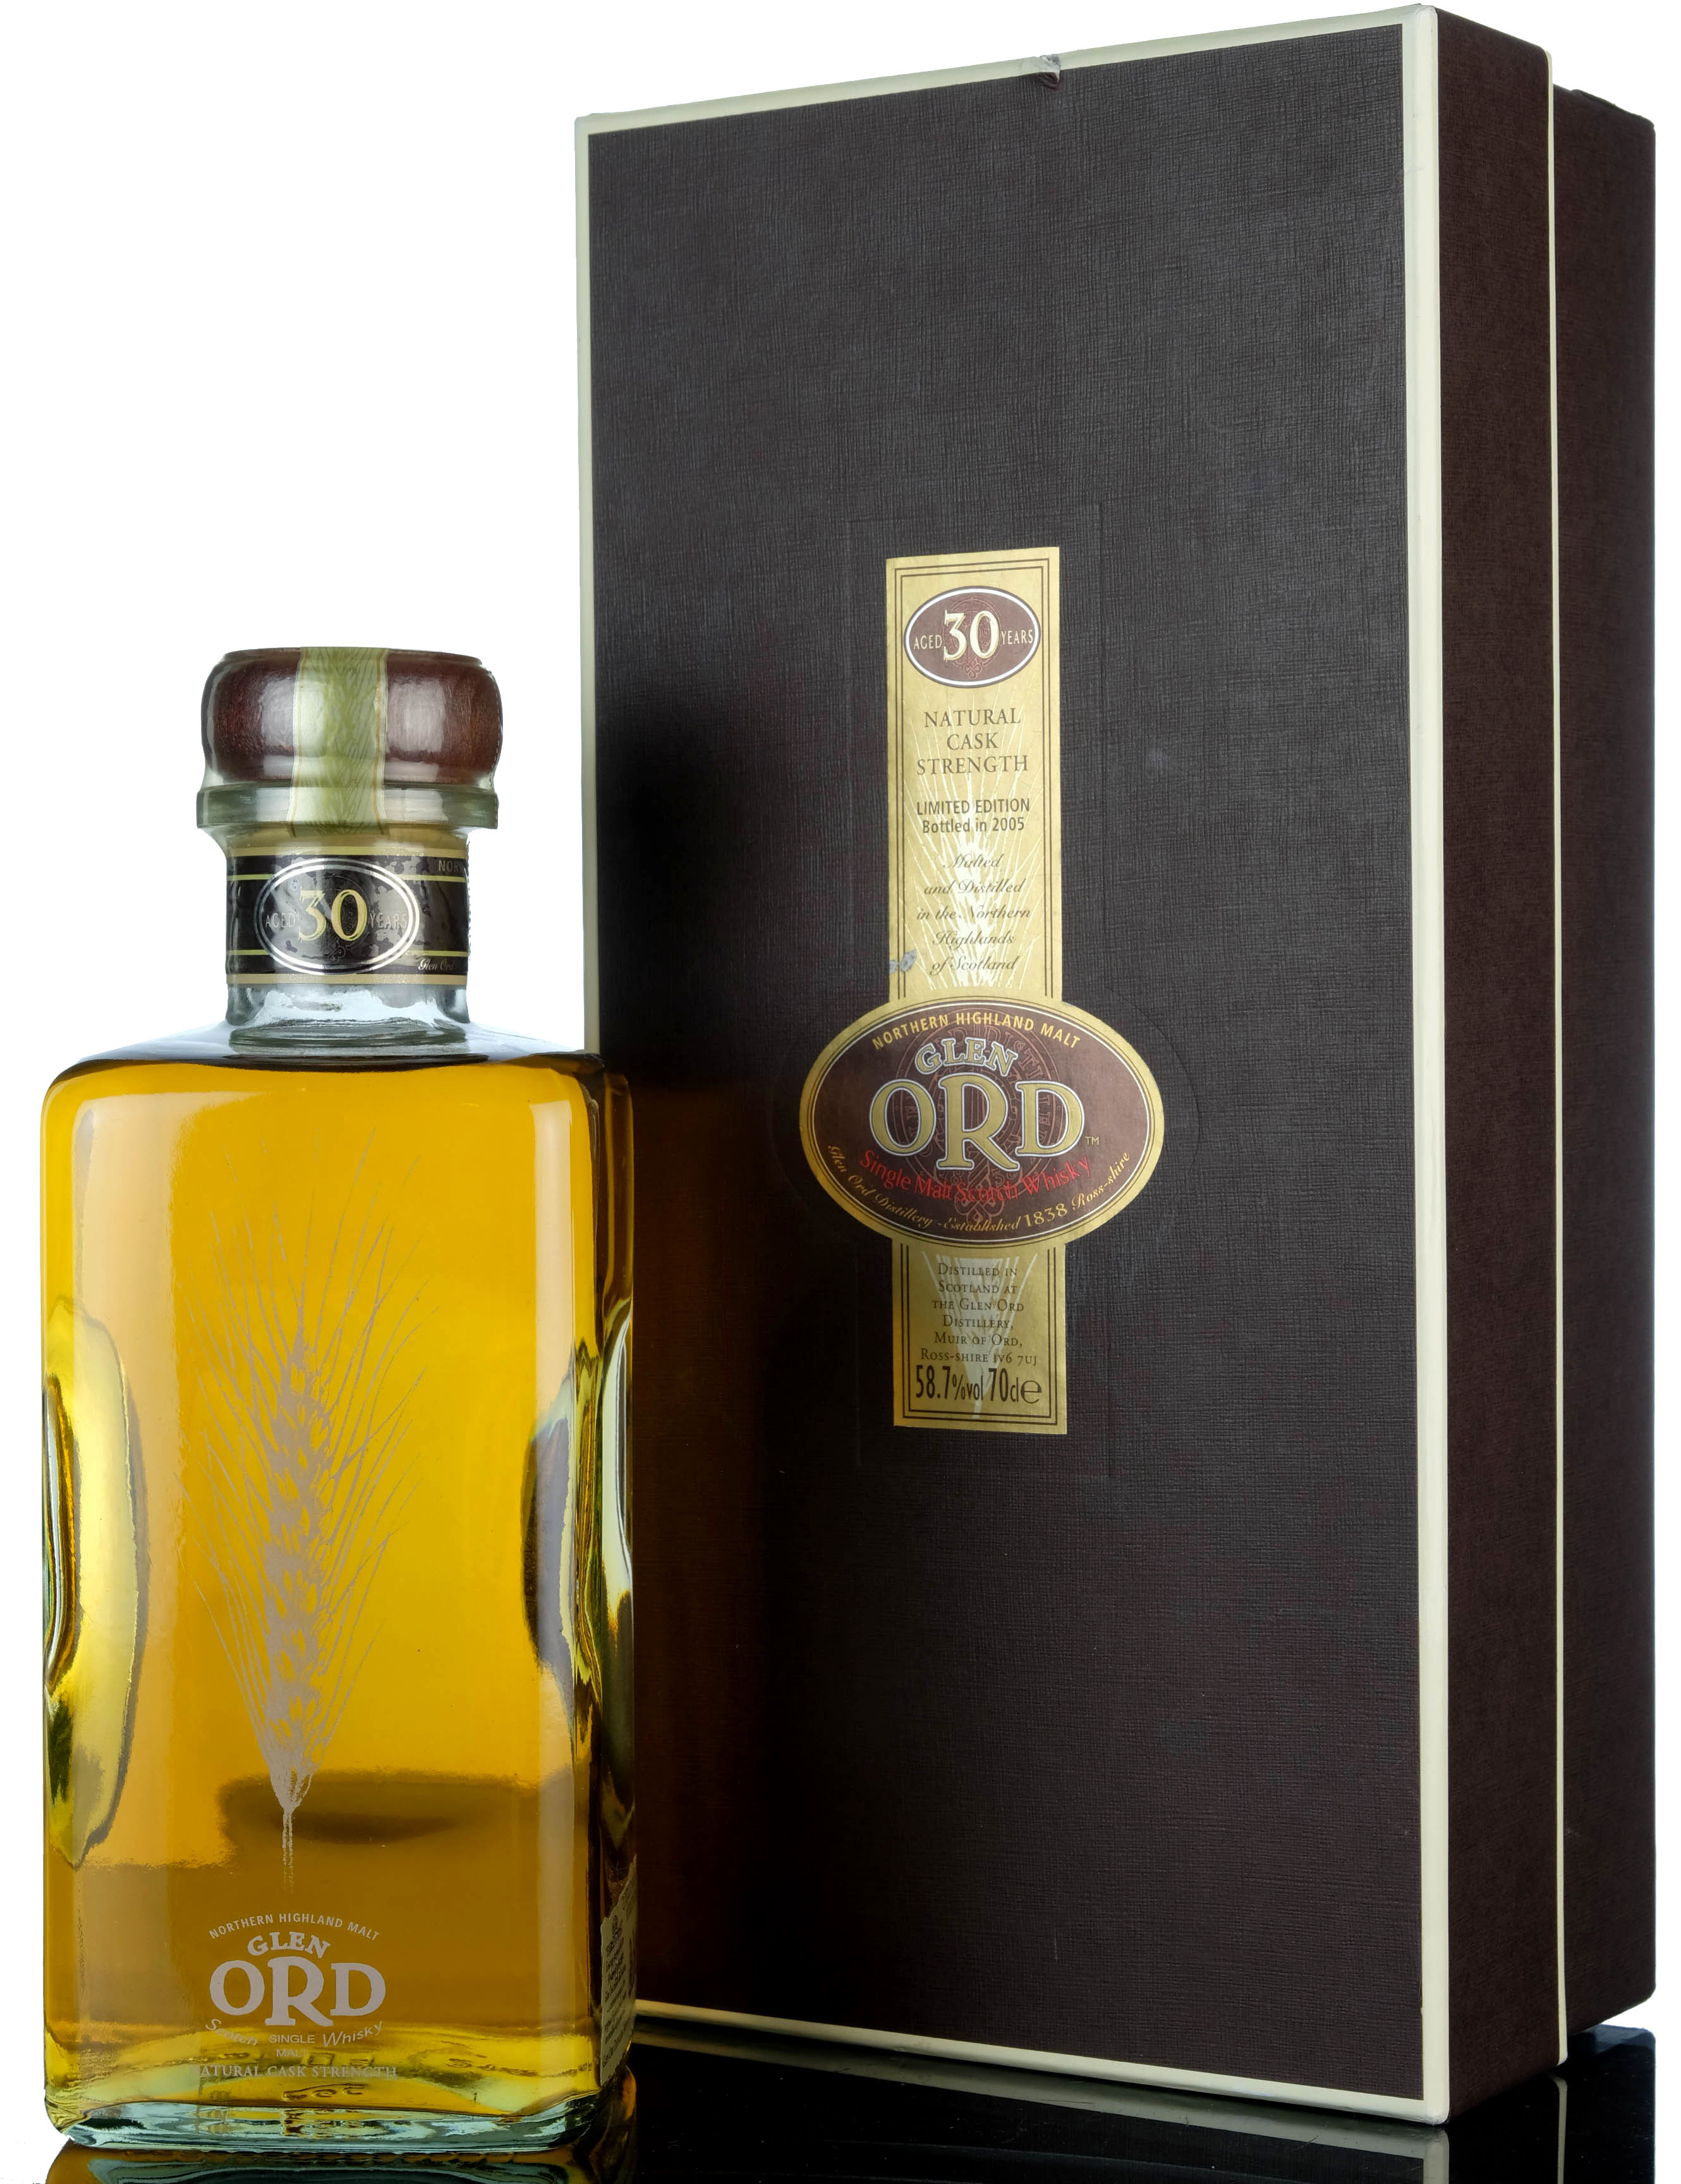 Glen Ord 30 Year Old - 2005 Special Release